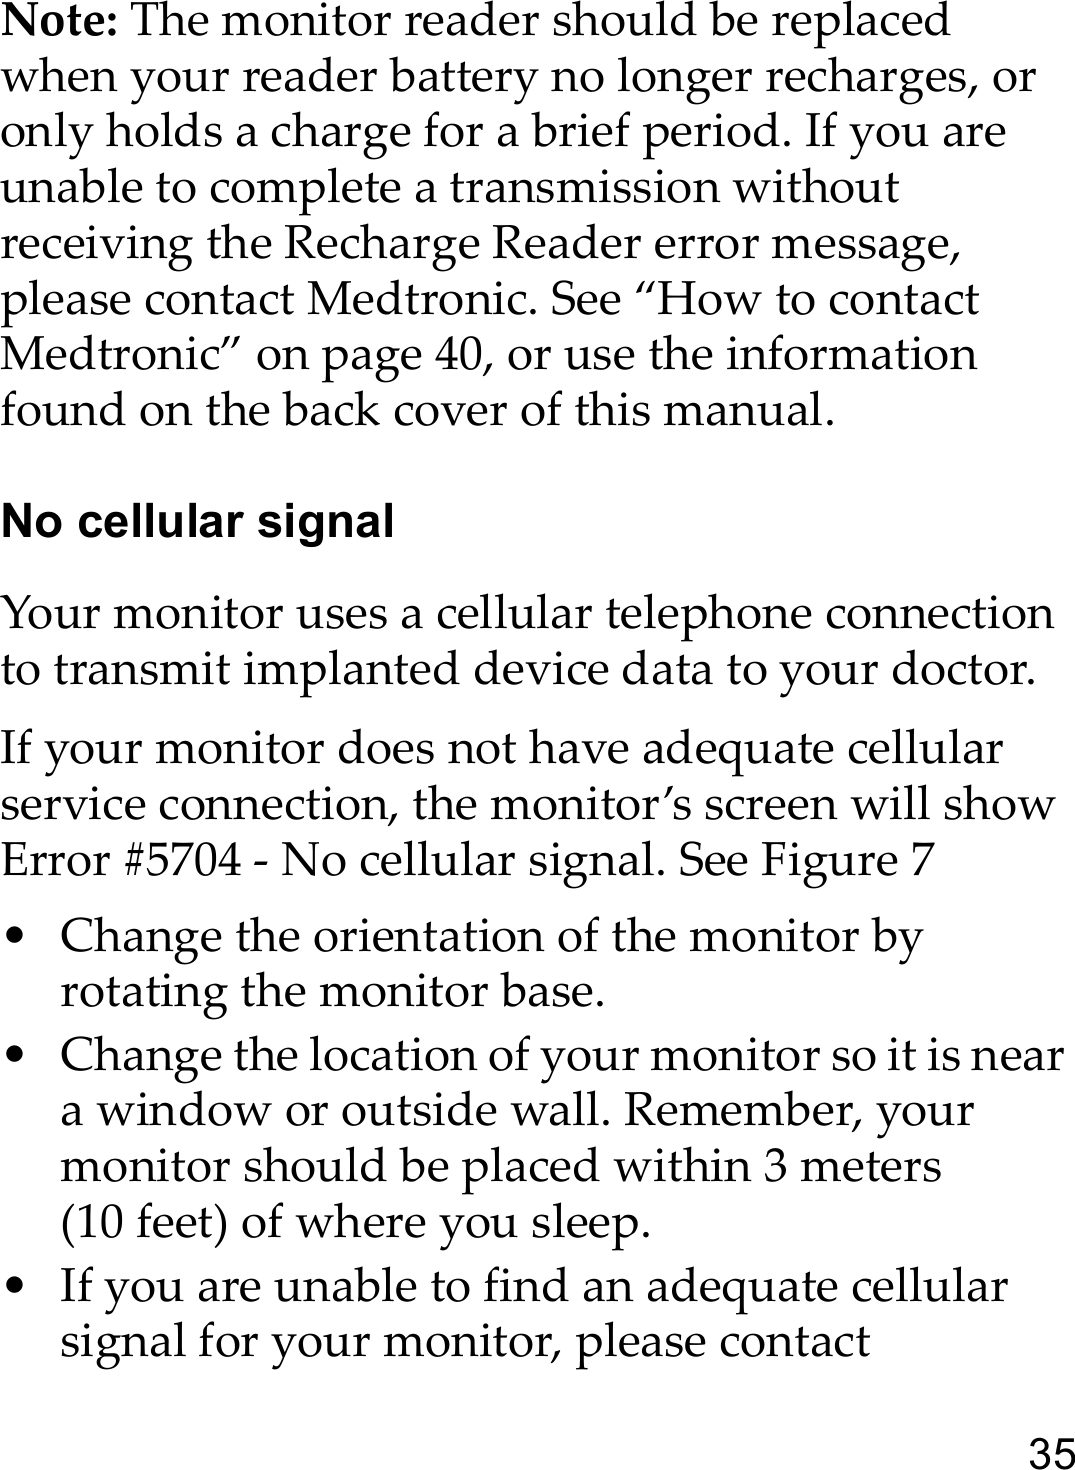 35Note: The monitor reader should be replaced when your reader battery no longer recharges, or only holds a charge for a brief period. If you are unable to complete a transmission without receiving the Recharge Reader error message, please contact Medtronic. See “How to contact Medtronic” on page 40, or use the information found on the back cover of this manual. No cellular signalYour monitor uses a cellular telephone connection to transmit implanted device data to your doctor.If your monitor does not have adequate cellular service connection, the monitor’s screen will show Error #5704 - No cellular signal. See Figure 7• Change the orientation of the monitor by rotating the monitor base.• Change the location of your monitor so it is near a window or outside wall. Remember, your monitor should be placed within 3 meters (10 feet) of where you sleep.• If you are unable to find an adequate cellular signal for your monitor, please contact 